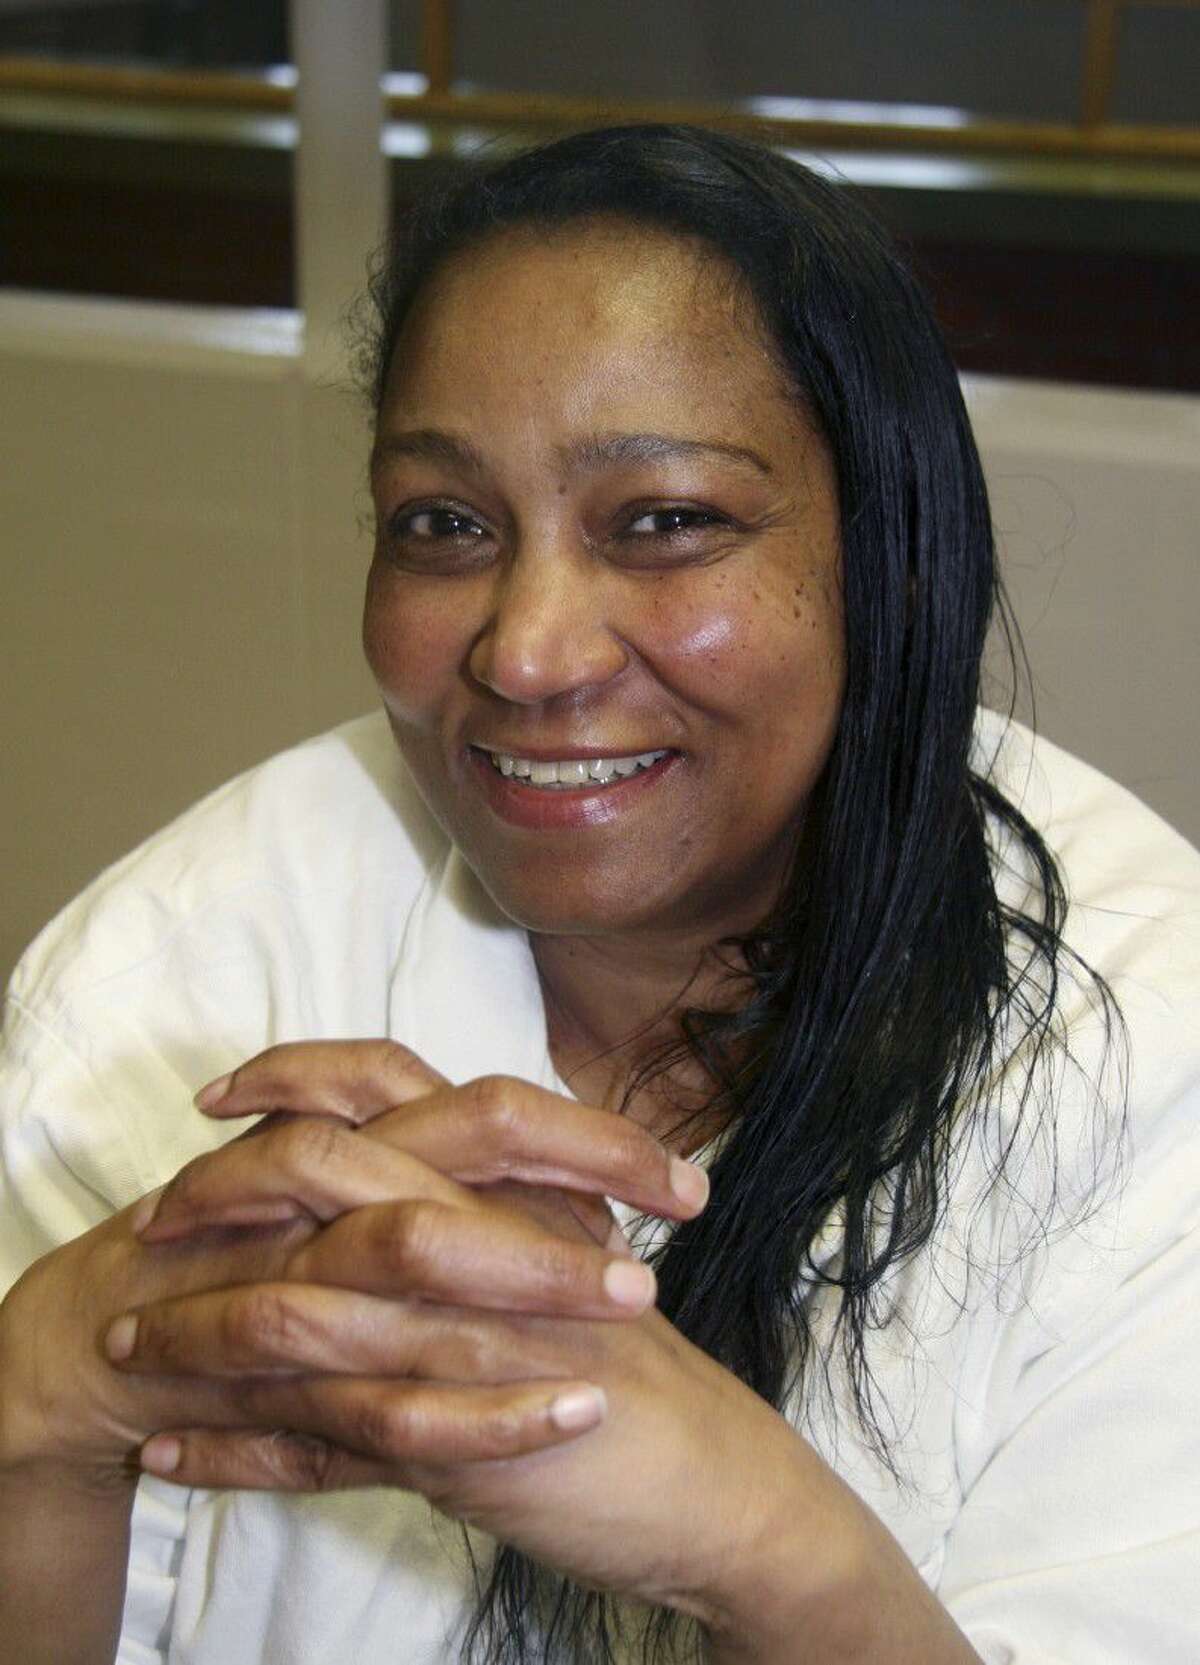 A judge on Thursday rejected arguments from attorneys for Linda Carty, a British woman on Texas death row, that prosecutors coerced witnesses and improperly hid information that could have affected the outcome of her murder trial 14 years ago.